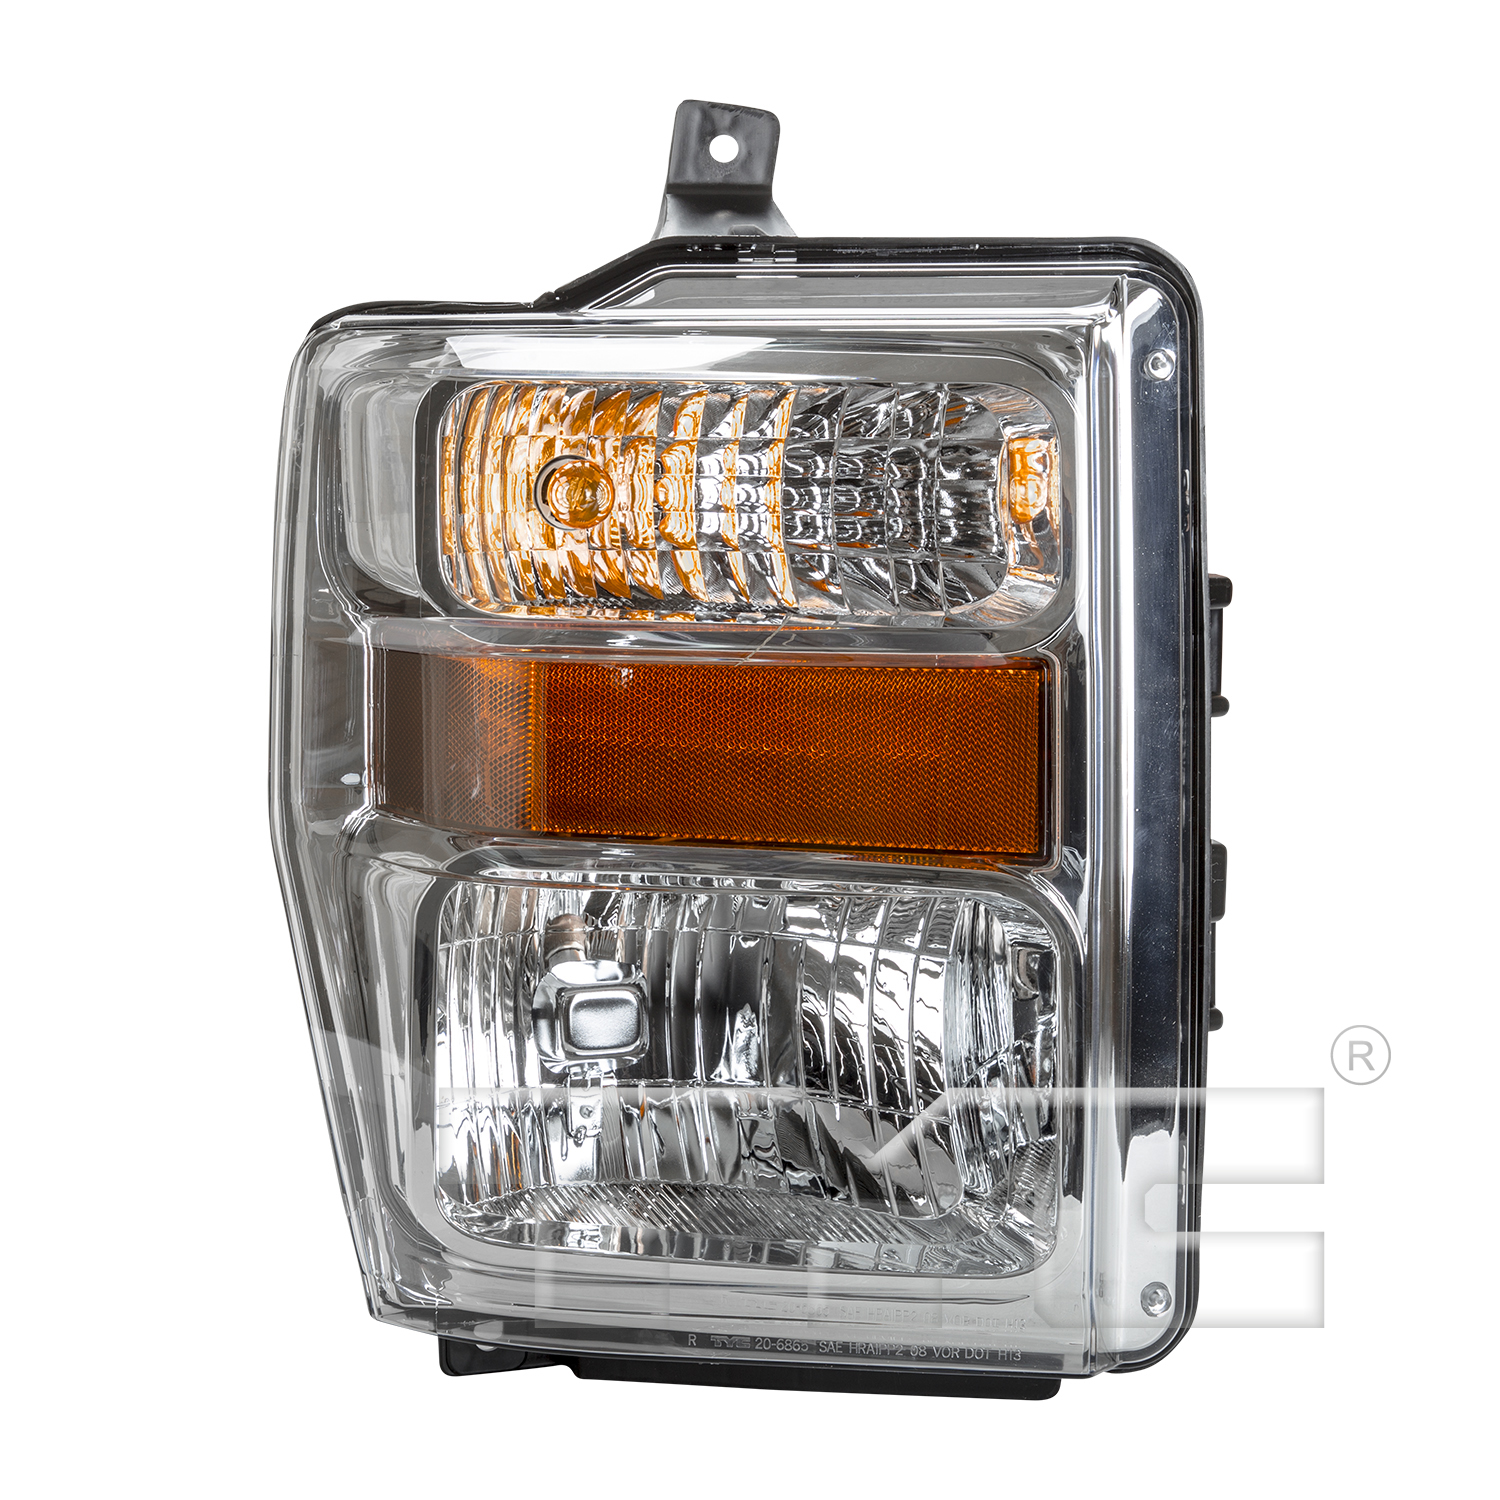 Aftermarket HEADLIGHTS for FORD - F-250 SUPER DUTY, F-250 SUPER DUTY,08-10,RT Headlamp assy composite